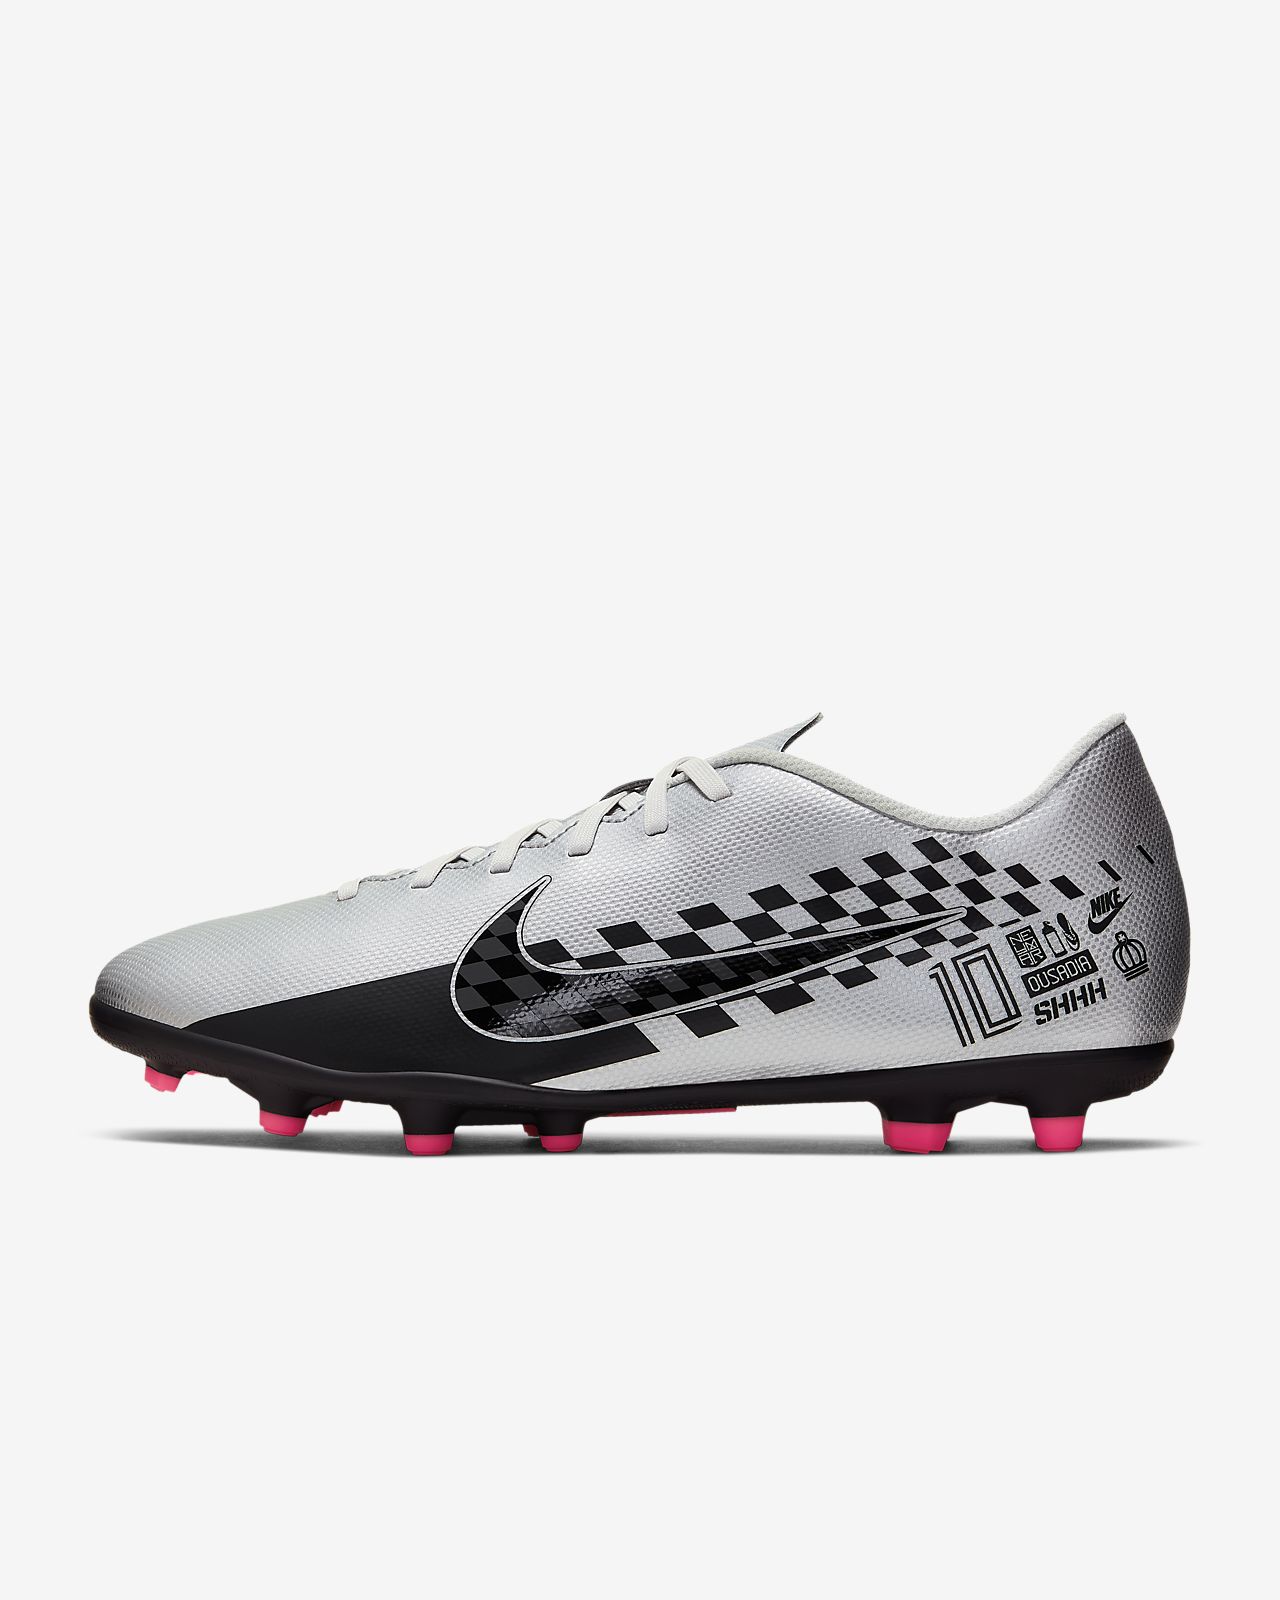 Nike Mercurial Vapor 8 Almost anything for sale in Malaysia